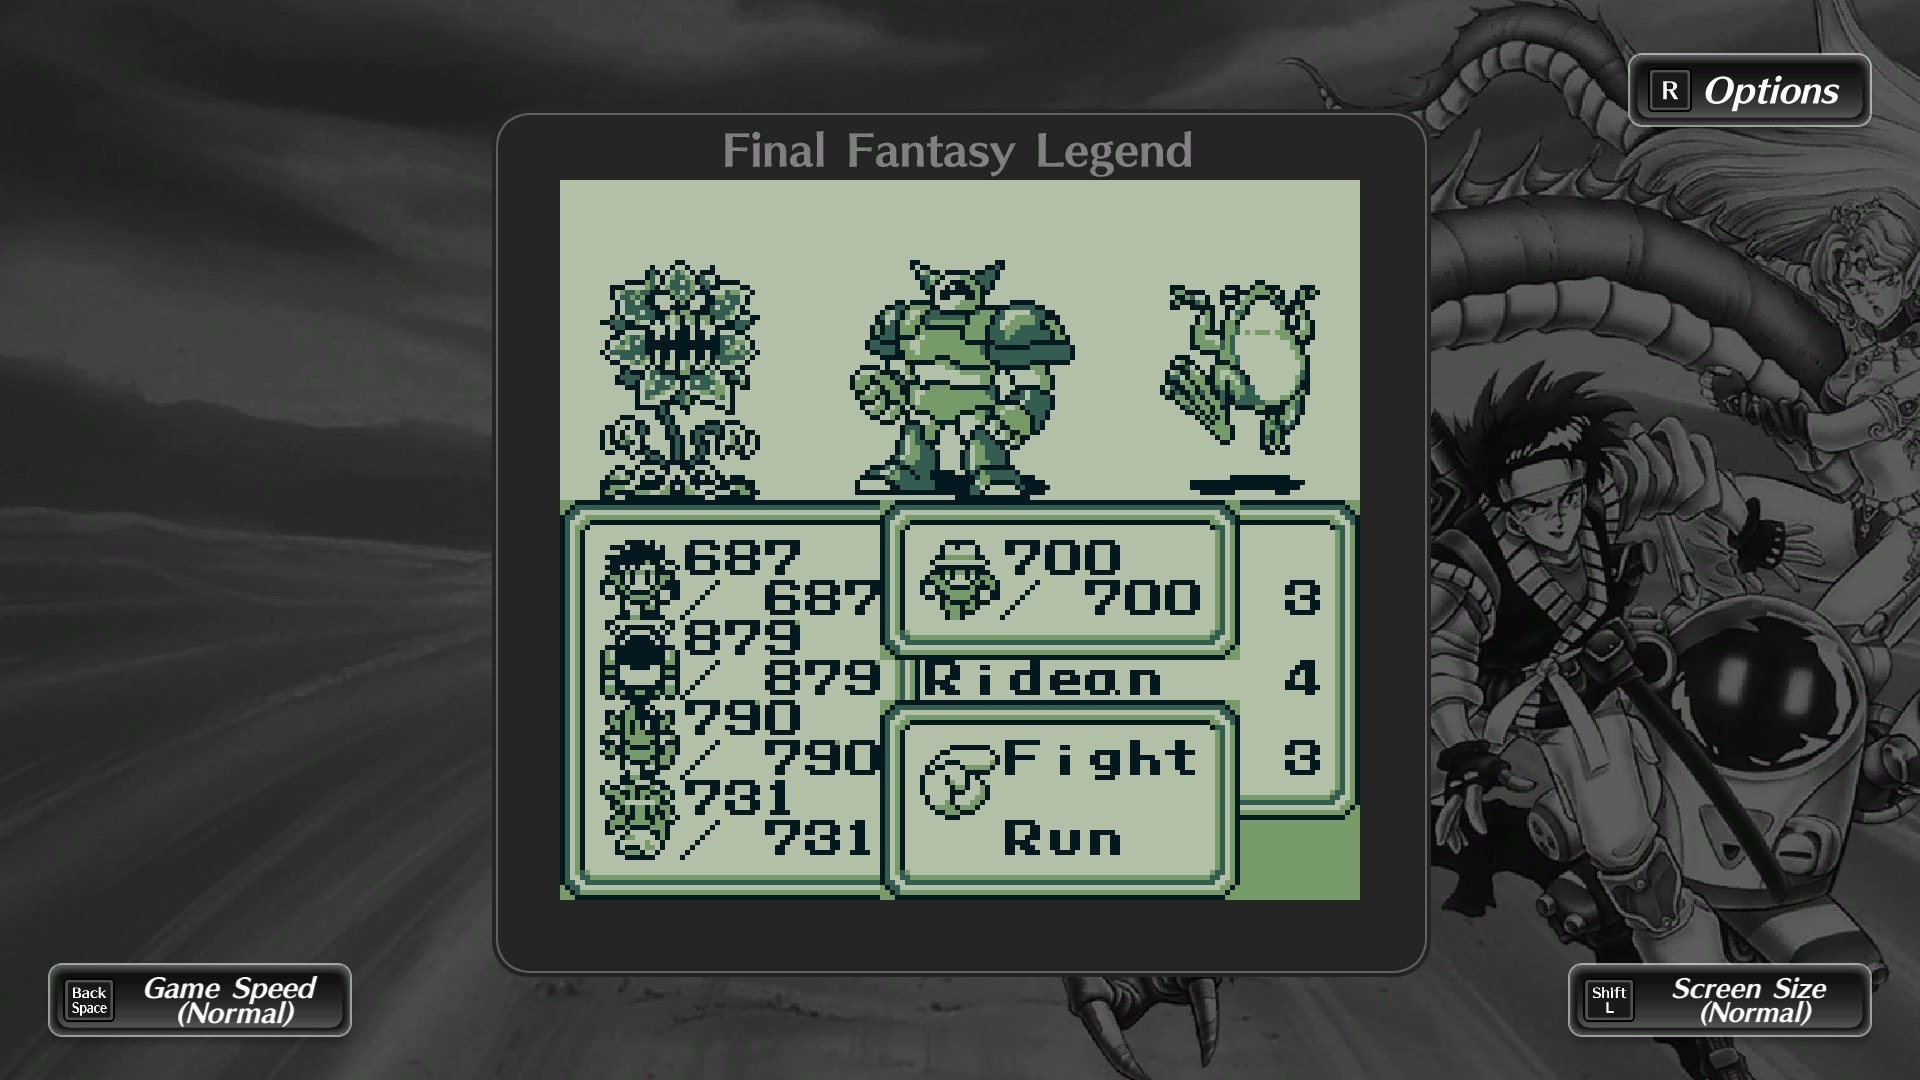 Best JRPGs - In Final Fantasy Legend, the player considers whether to fight a flower, a mech, and a prancing frogman.